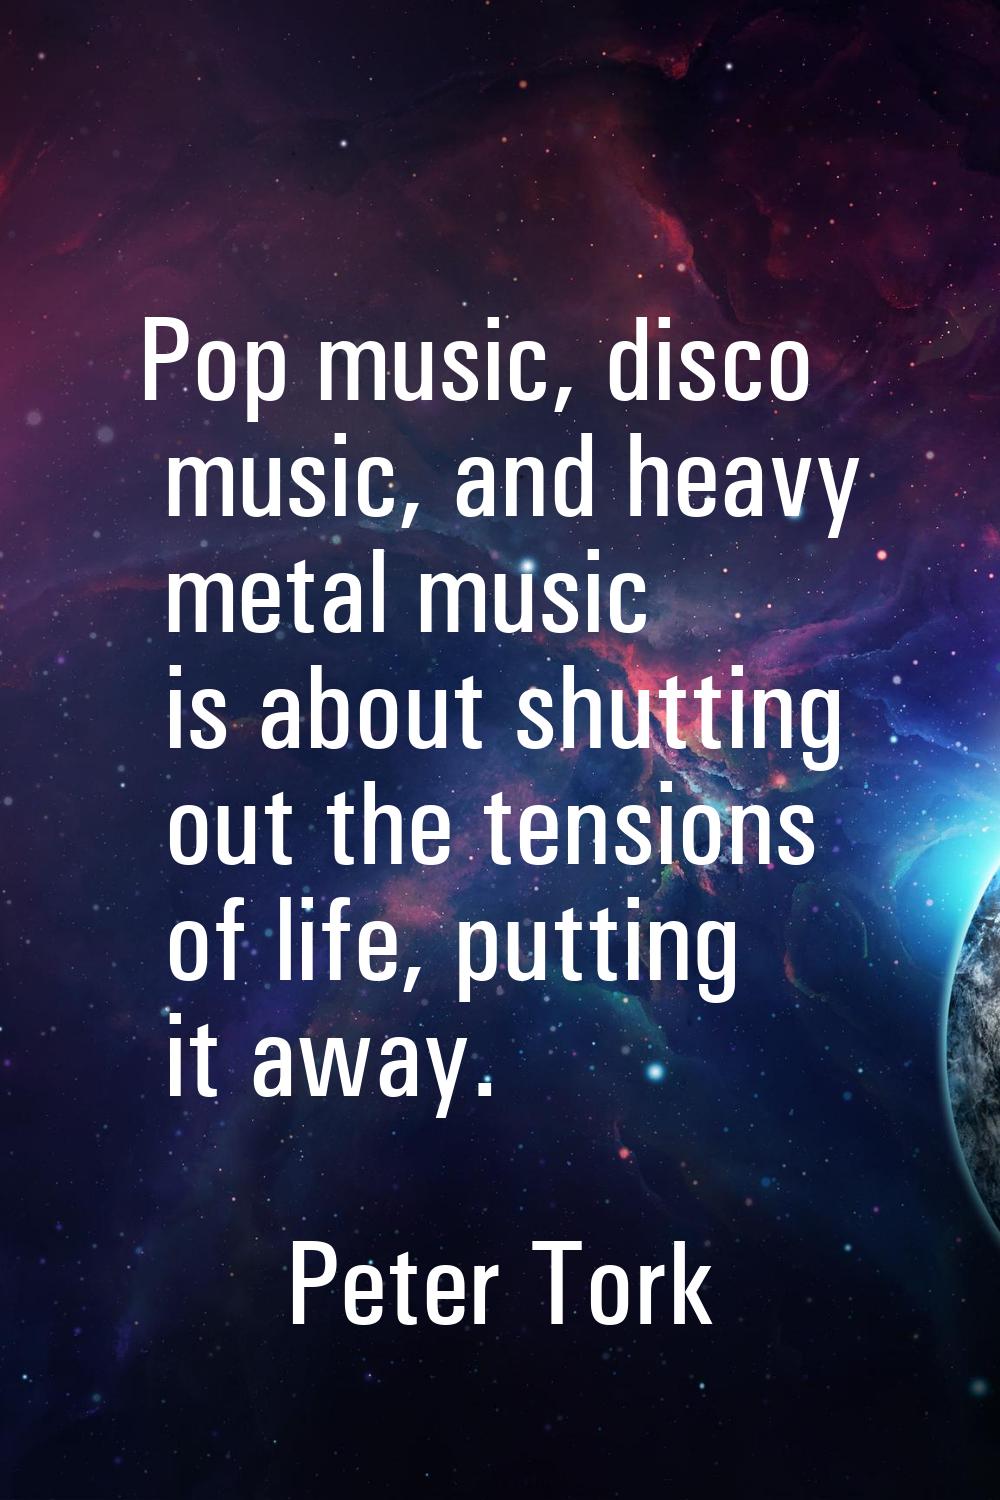 Pop music, disco music, and heavy metal music is about shutting out the tensions of life, putting i